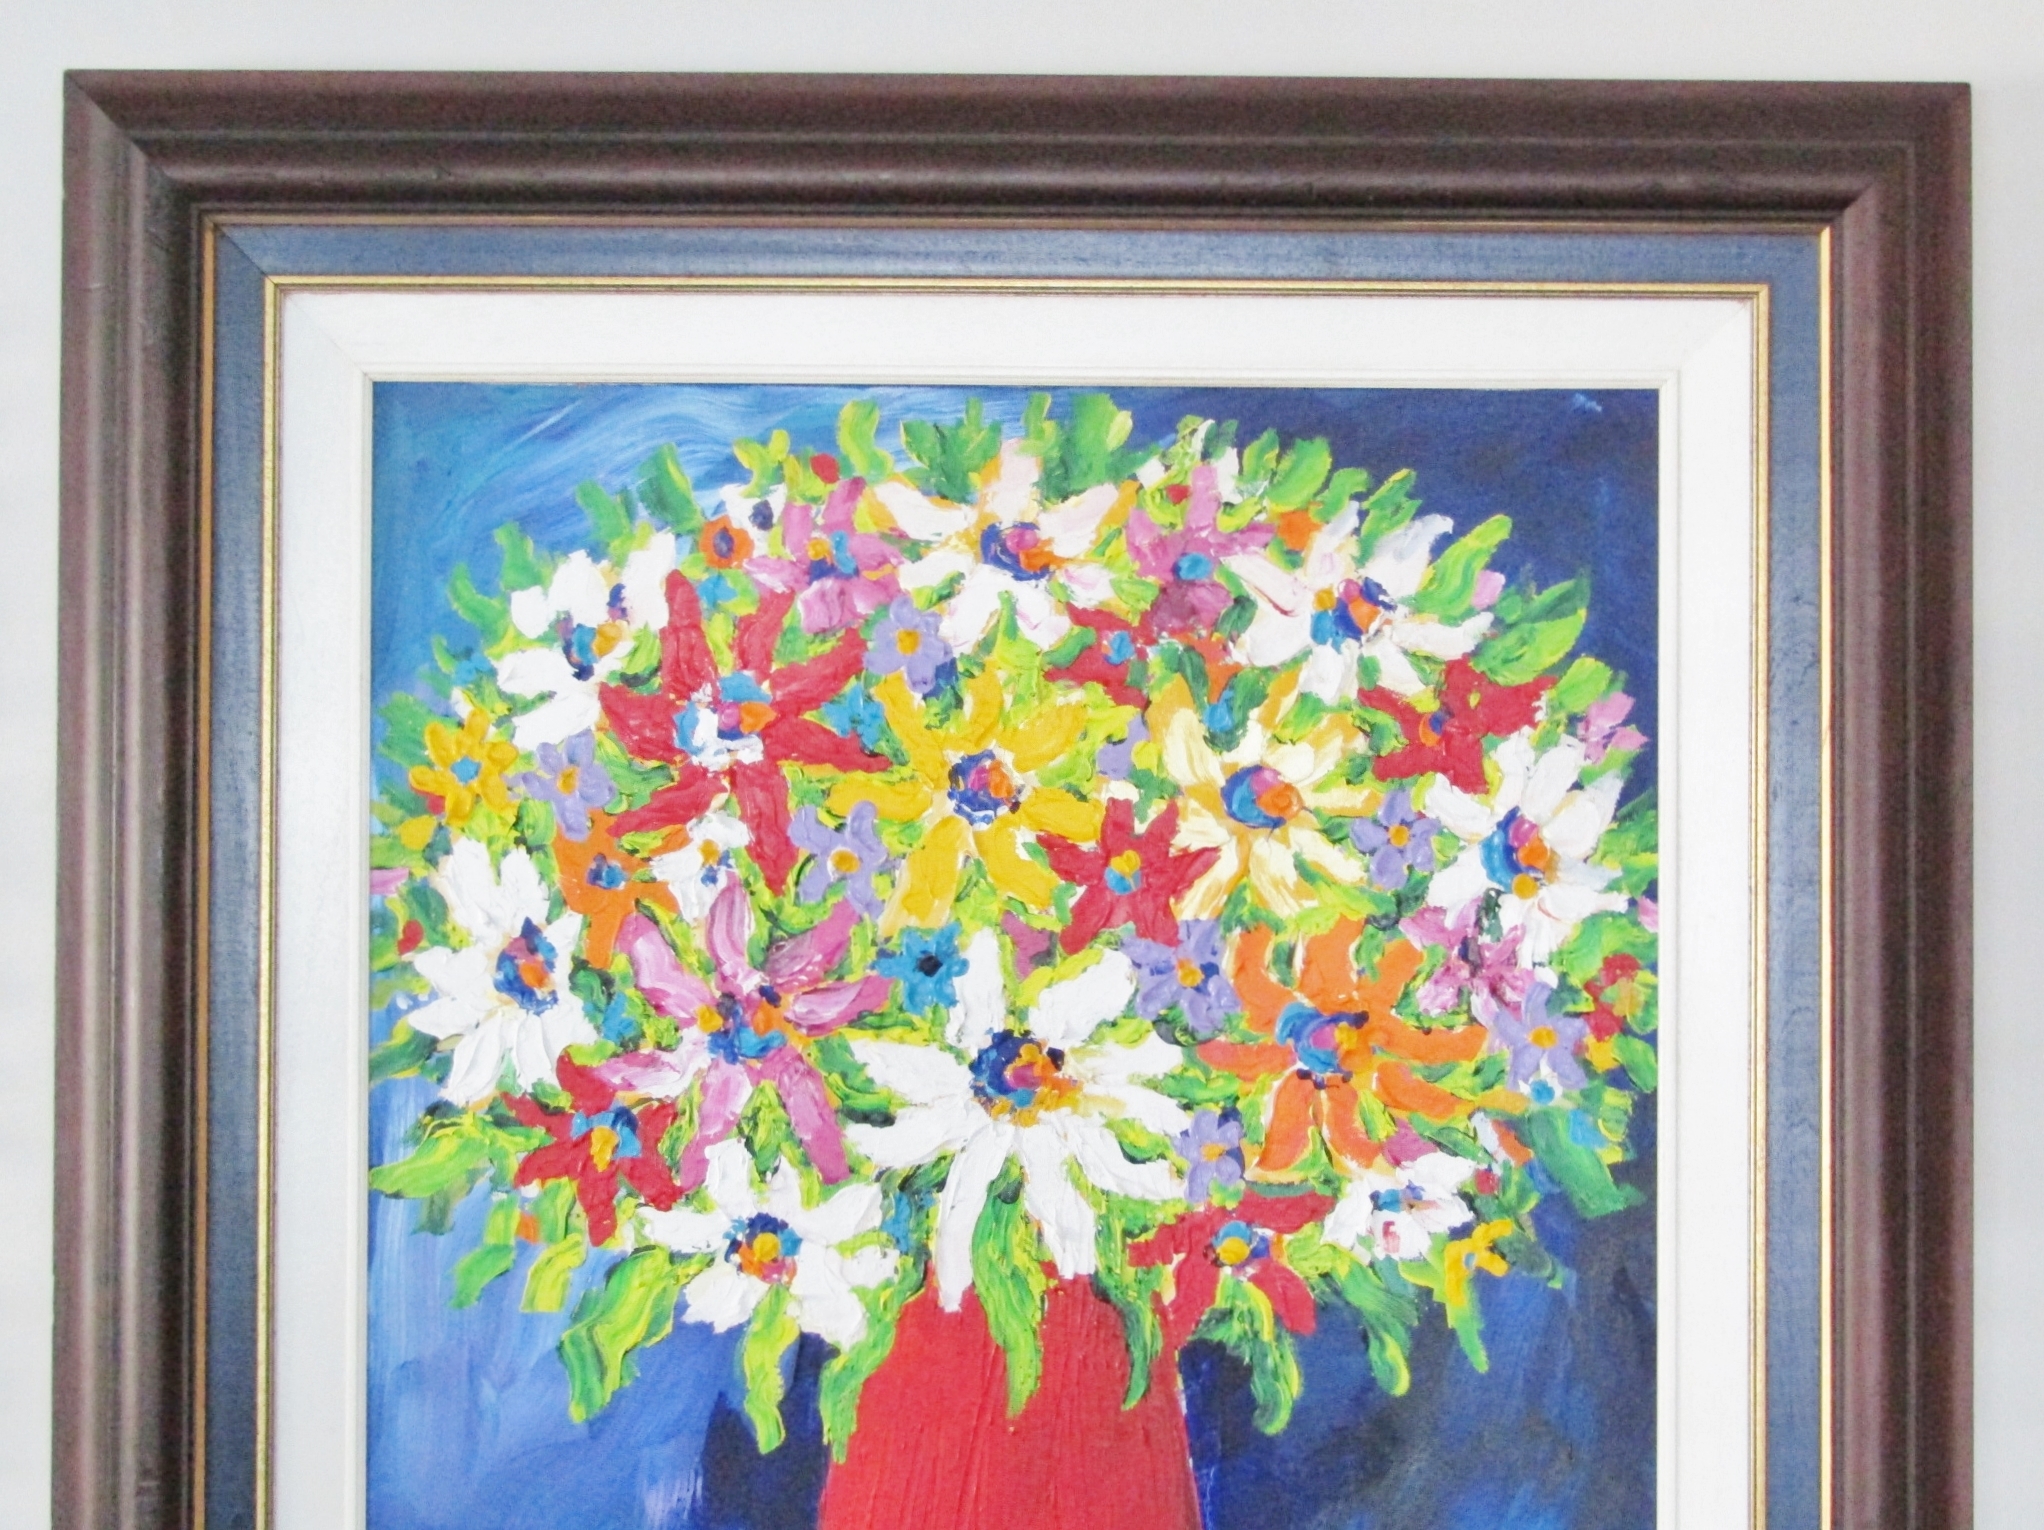 HUGE Original Portchie (1963- ) Painting “Flowers in Red Pot”